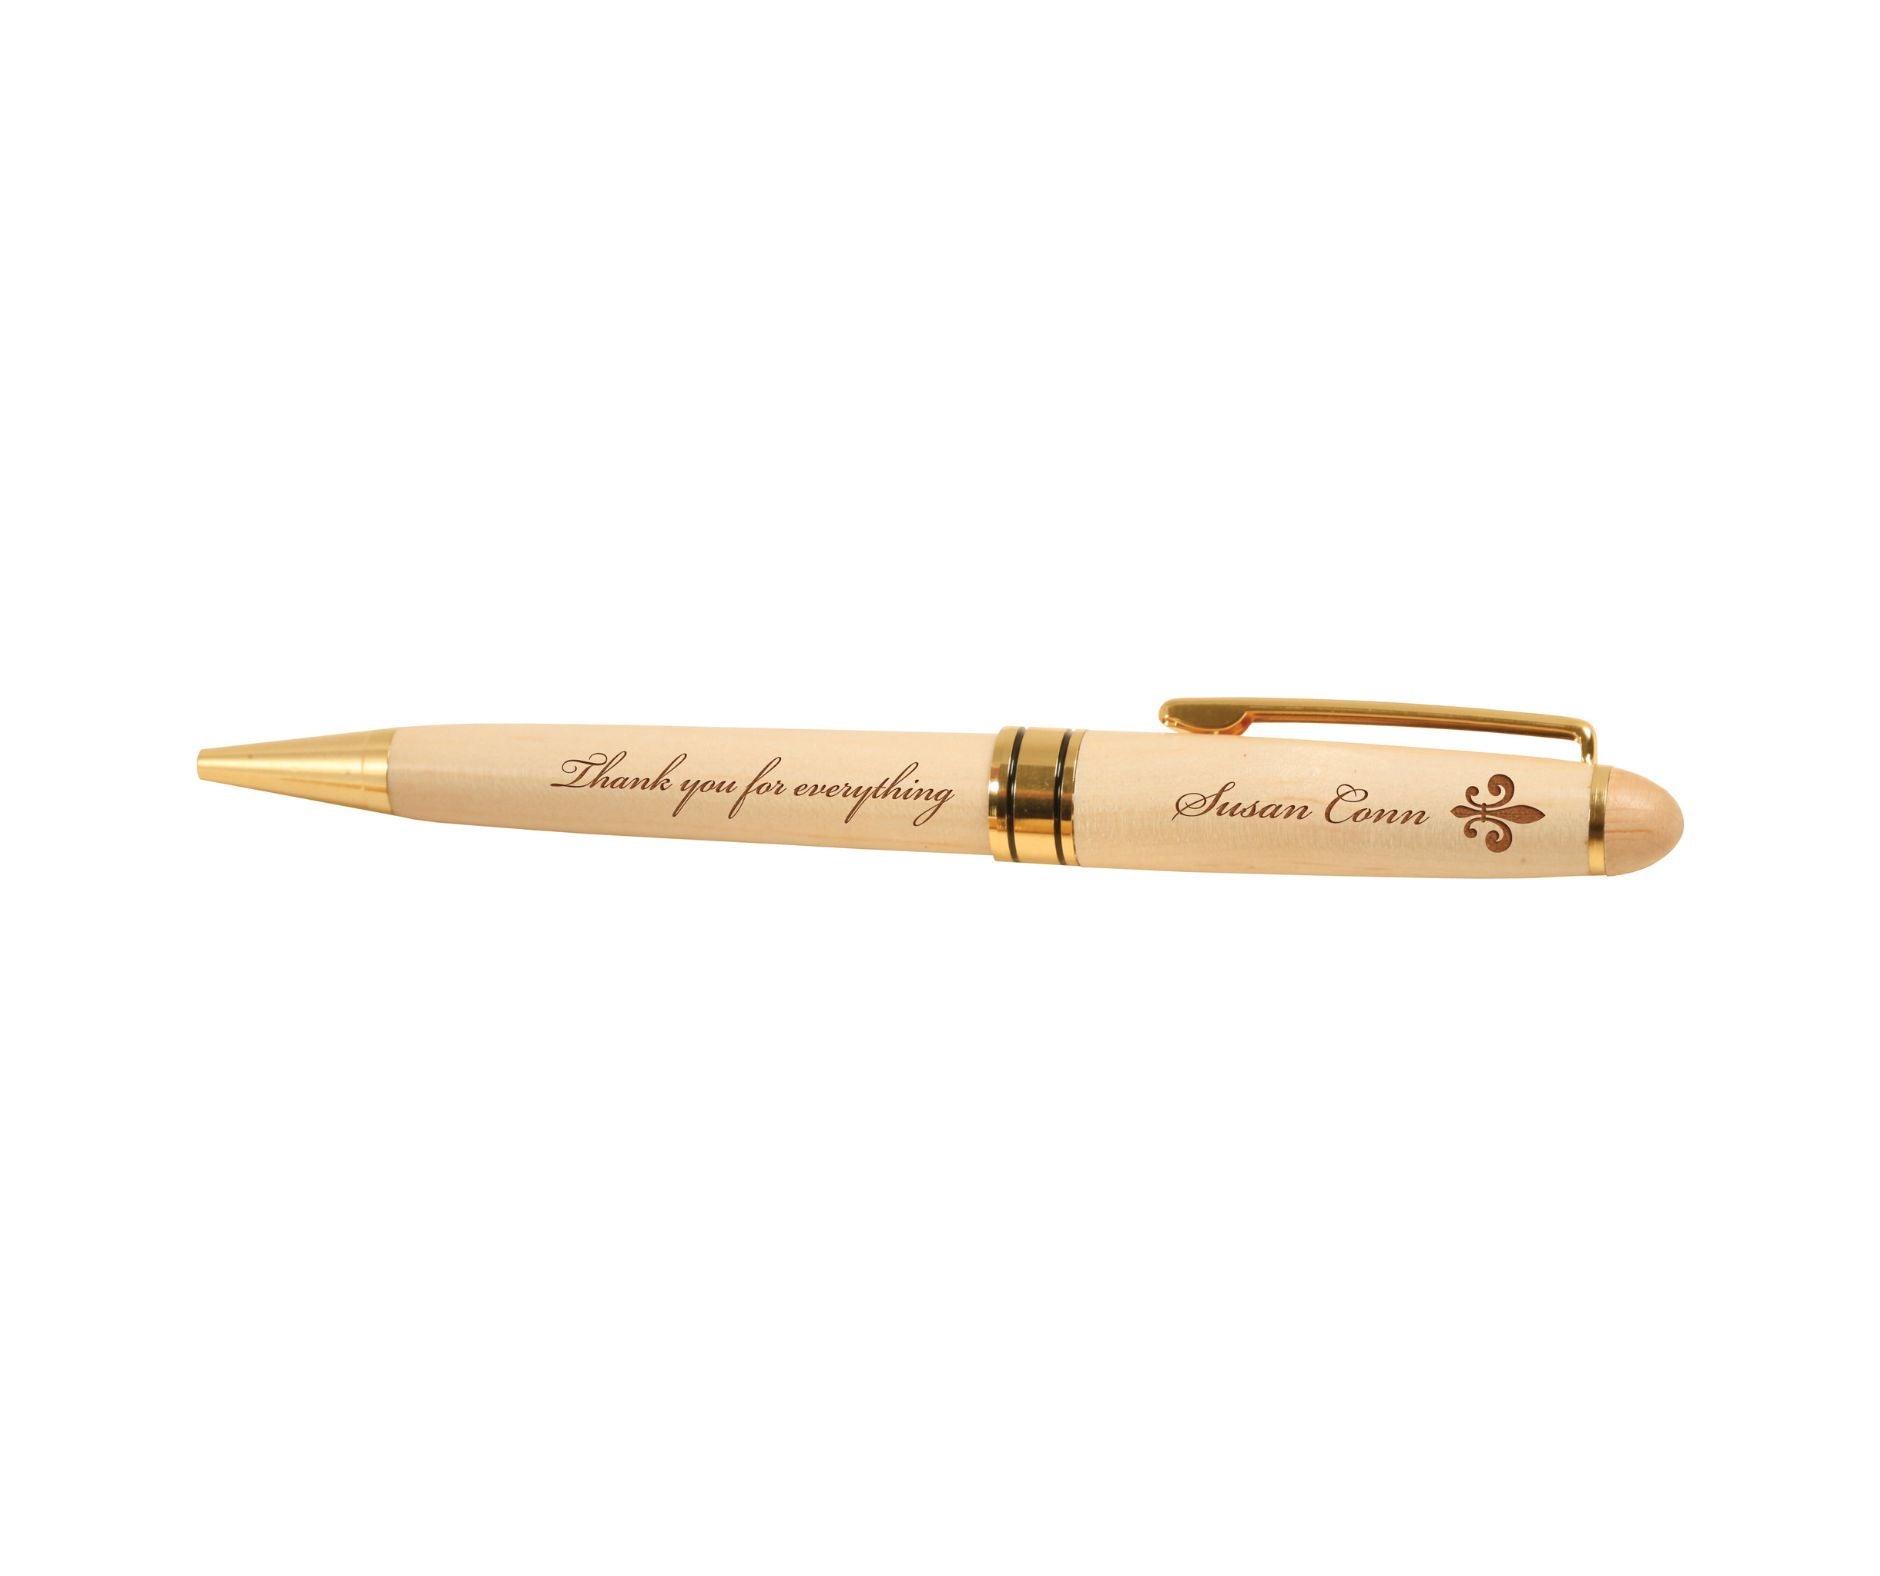 Personalized Custom Engraved Parker Classic Gold Ballpoint Pen Gift Blue  Ink | eBay